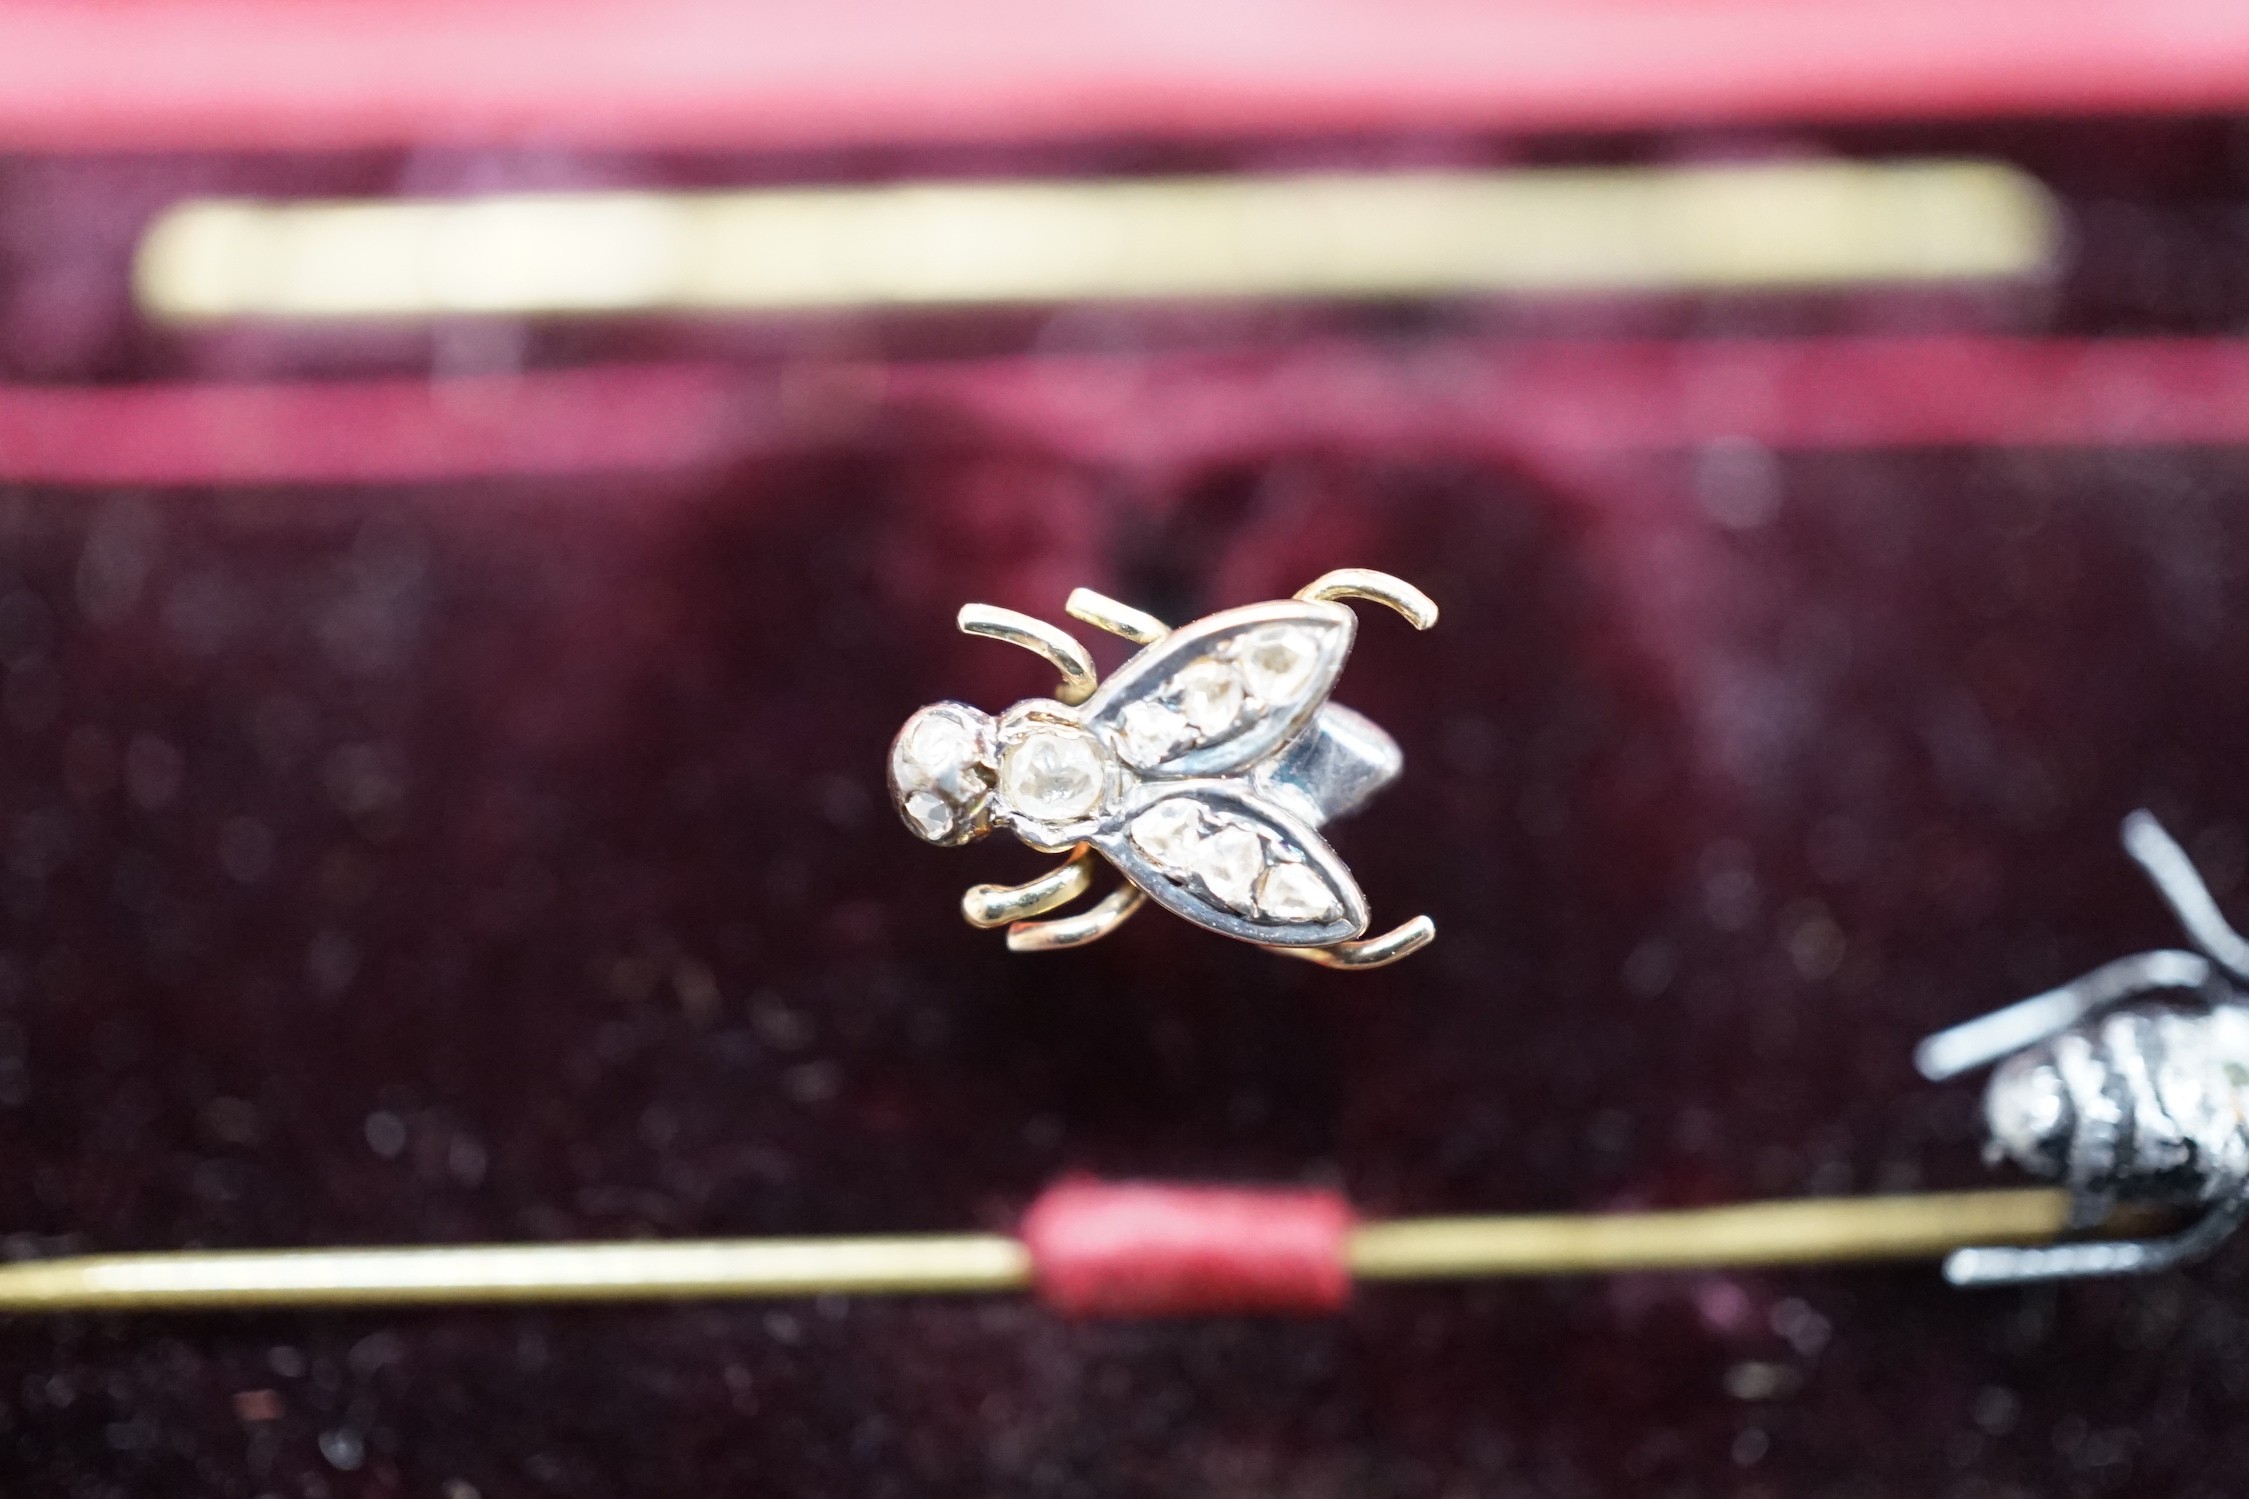 A 19th century yellow metal and rose cut diamond set 'fly' stud, 8mm and a bug stick pin.